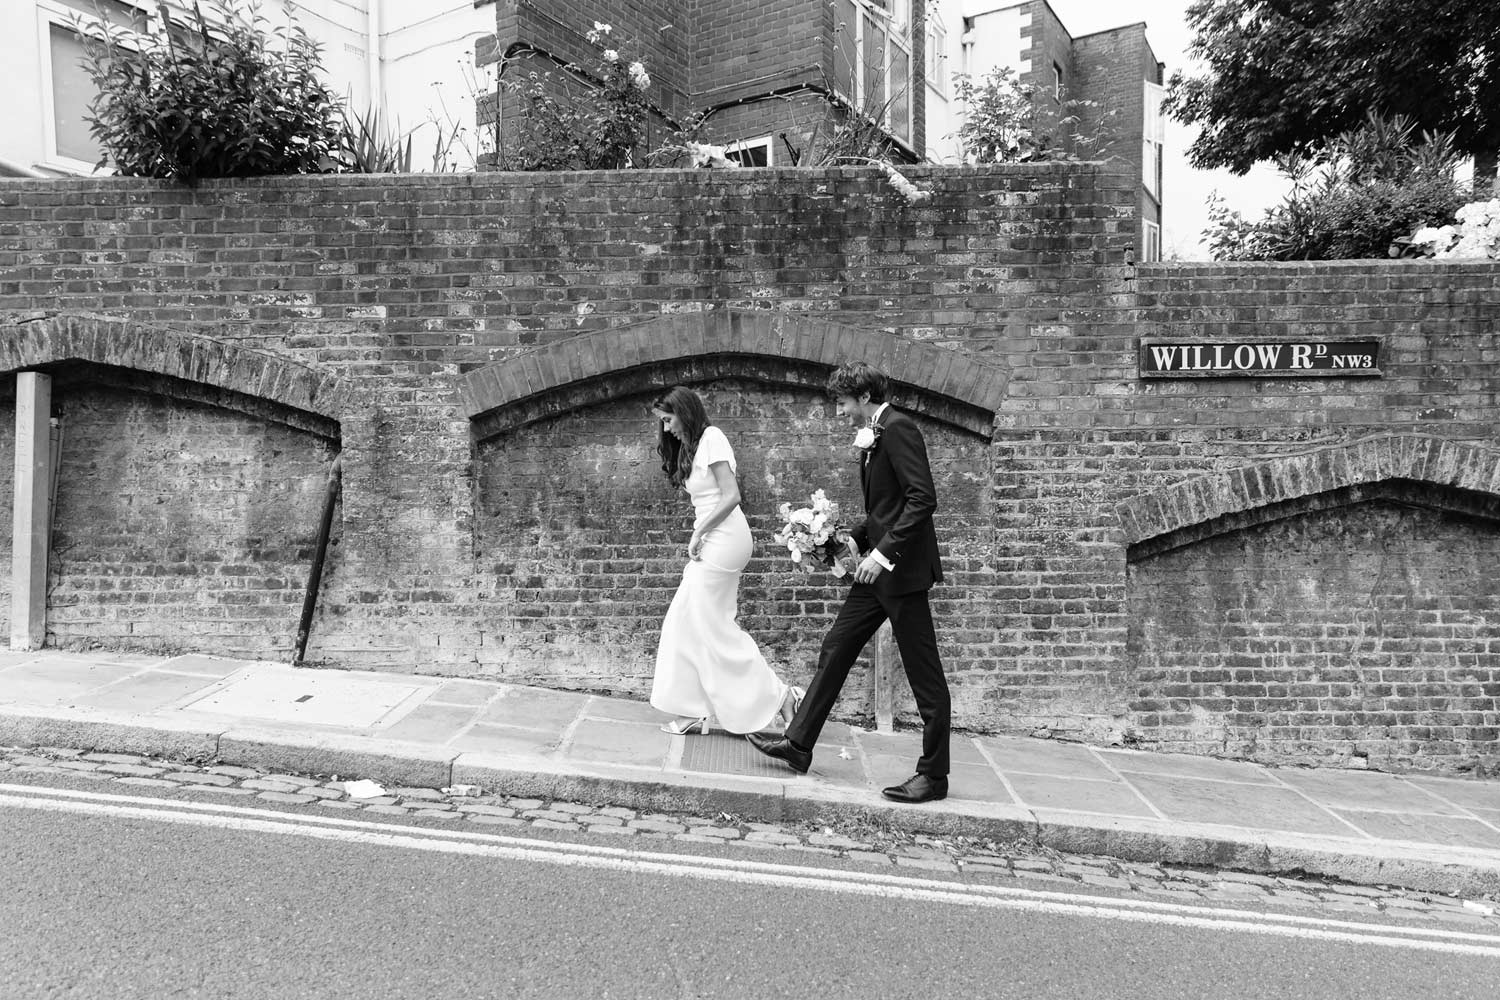 A groom and his bride walk back to Burgh House